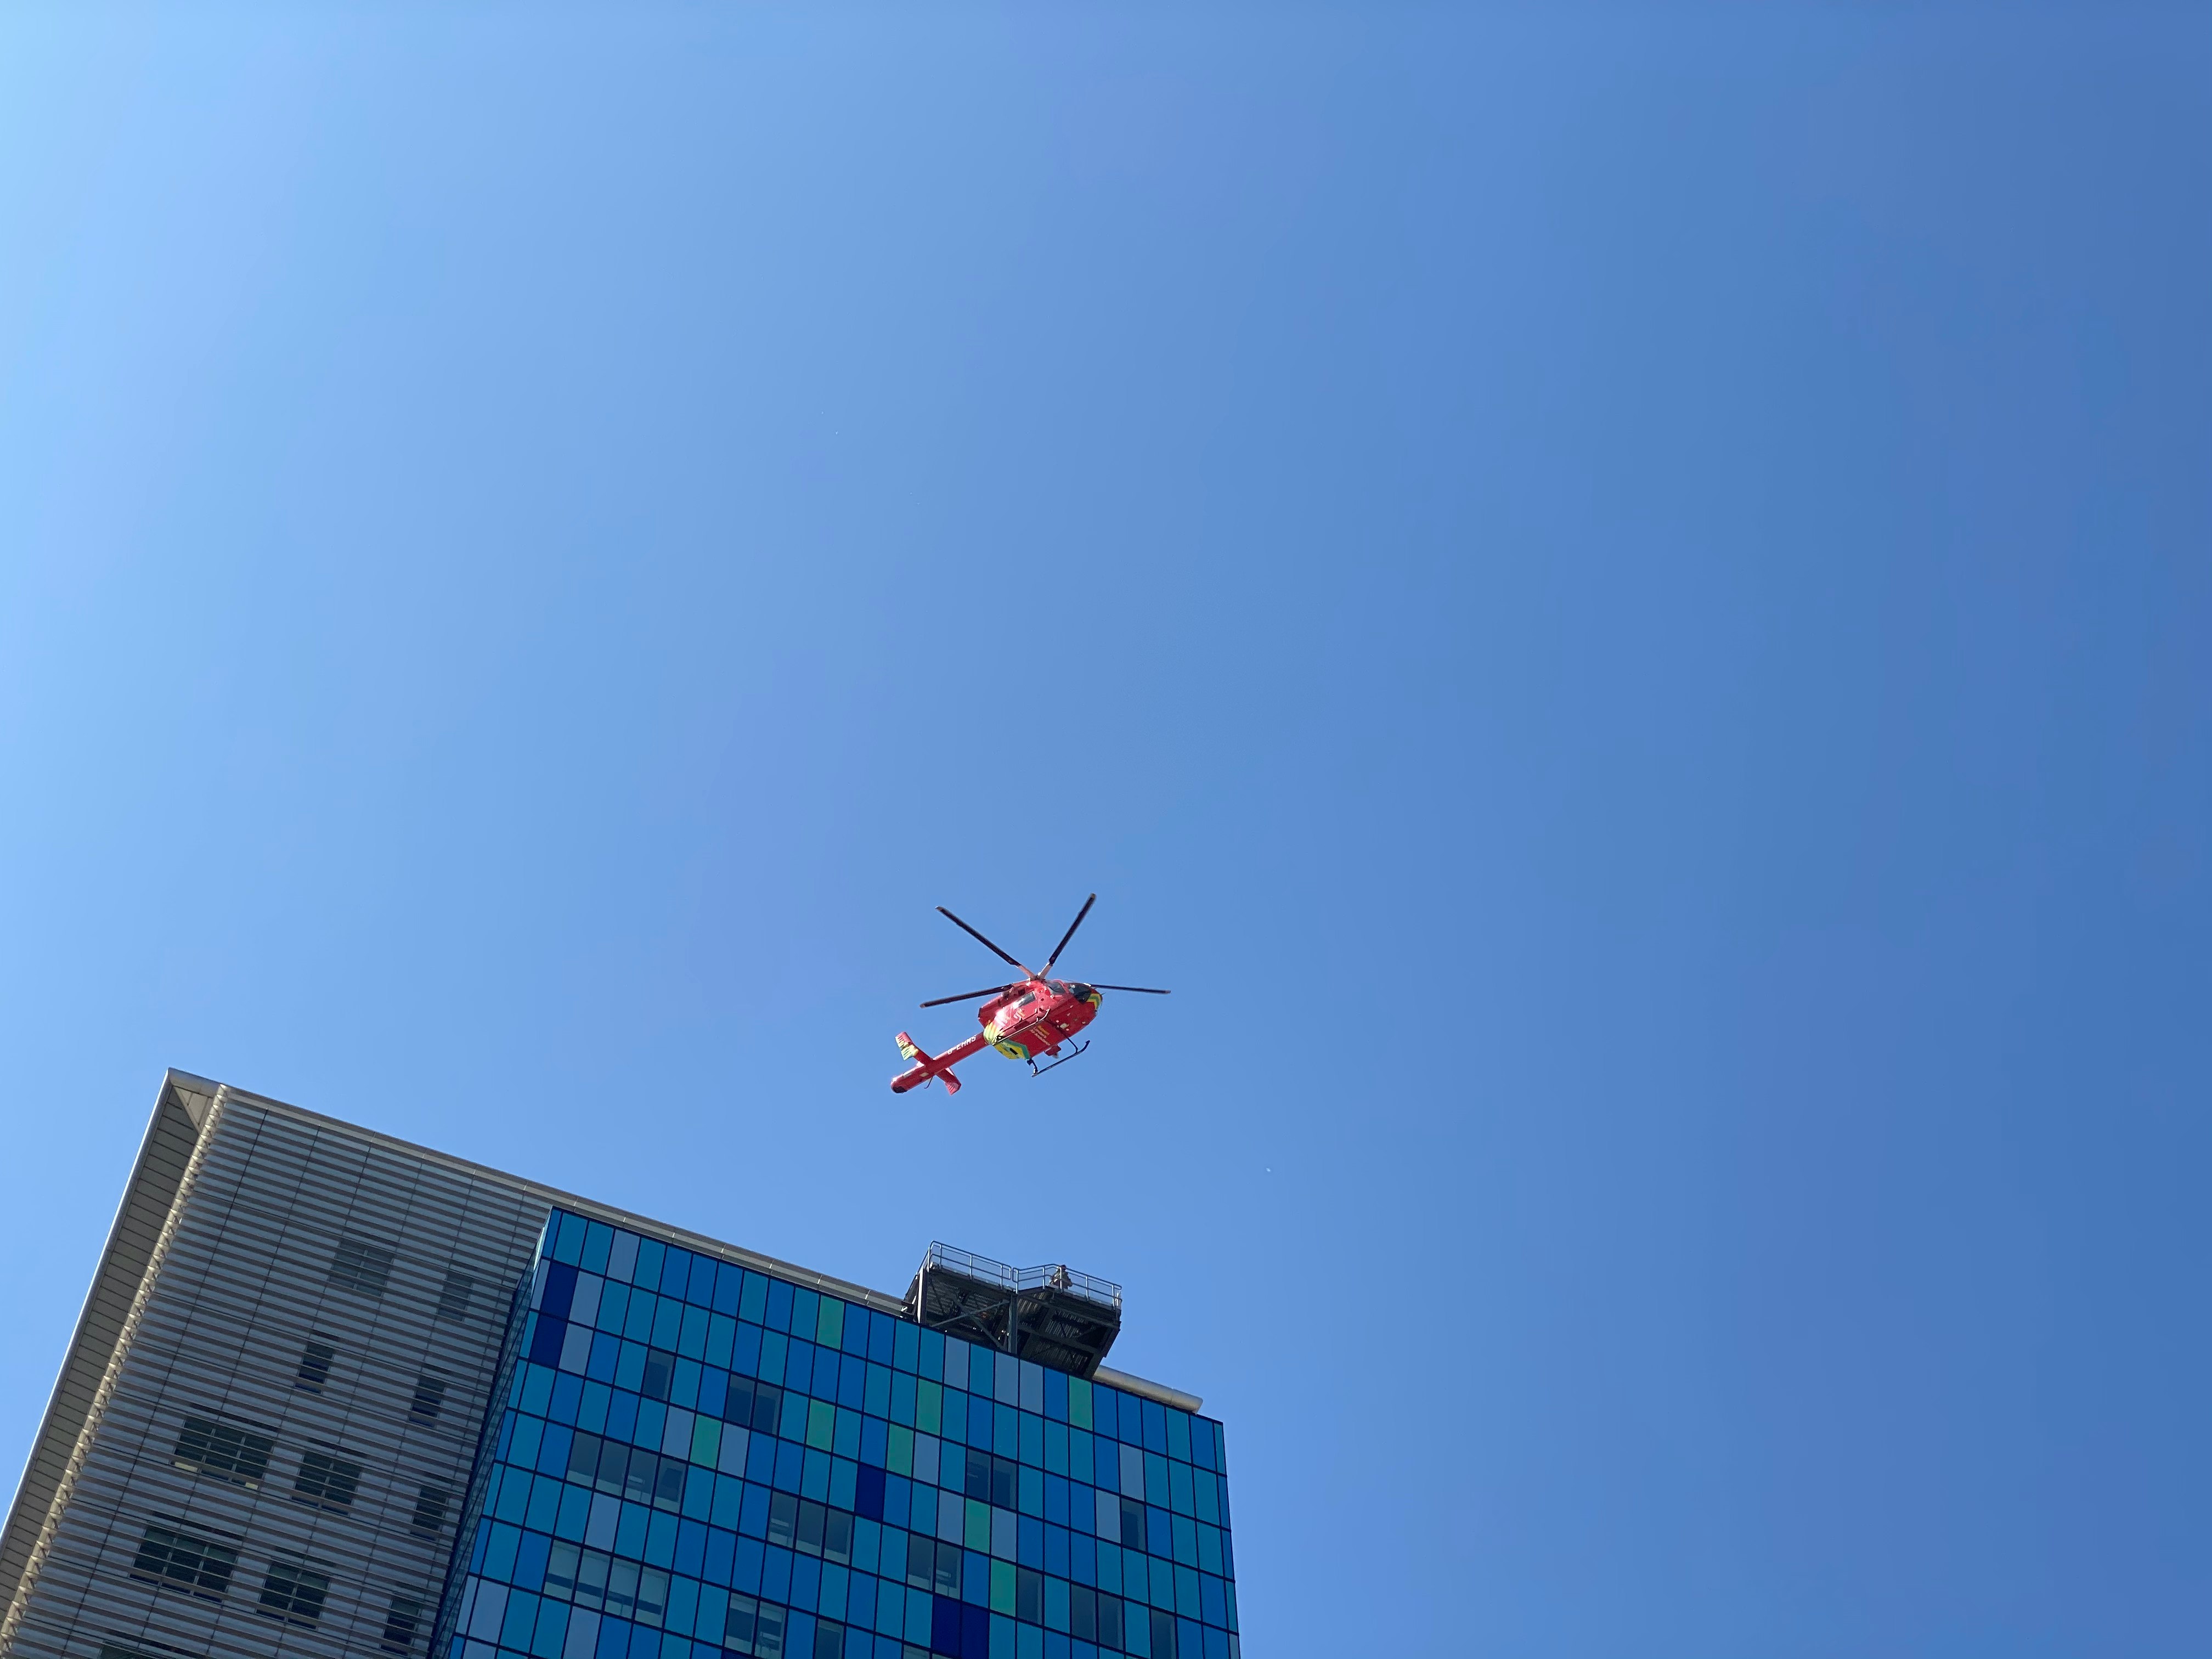 red and white helicopter flying over the building during daytime